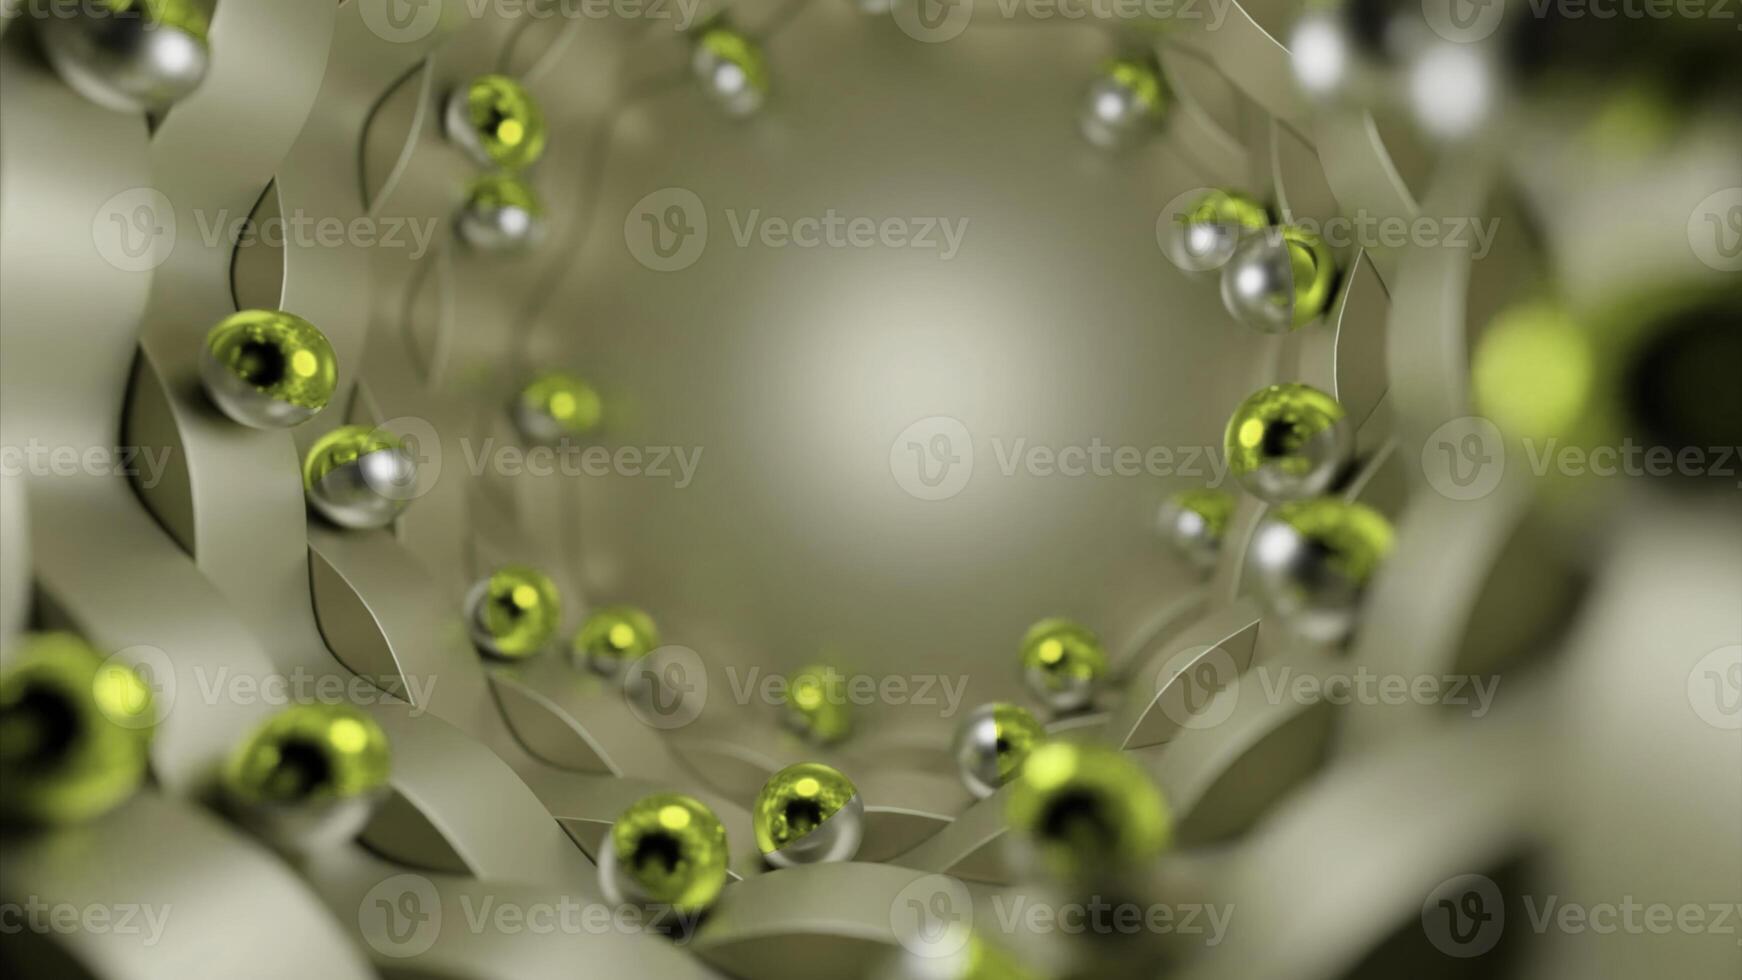 Abstract 3d background with metal balls or spheres rolling around. Design. Movement along the tunnel of green beads. photo